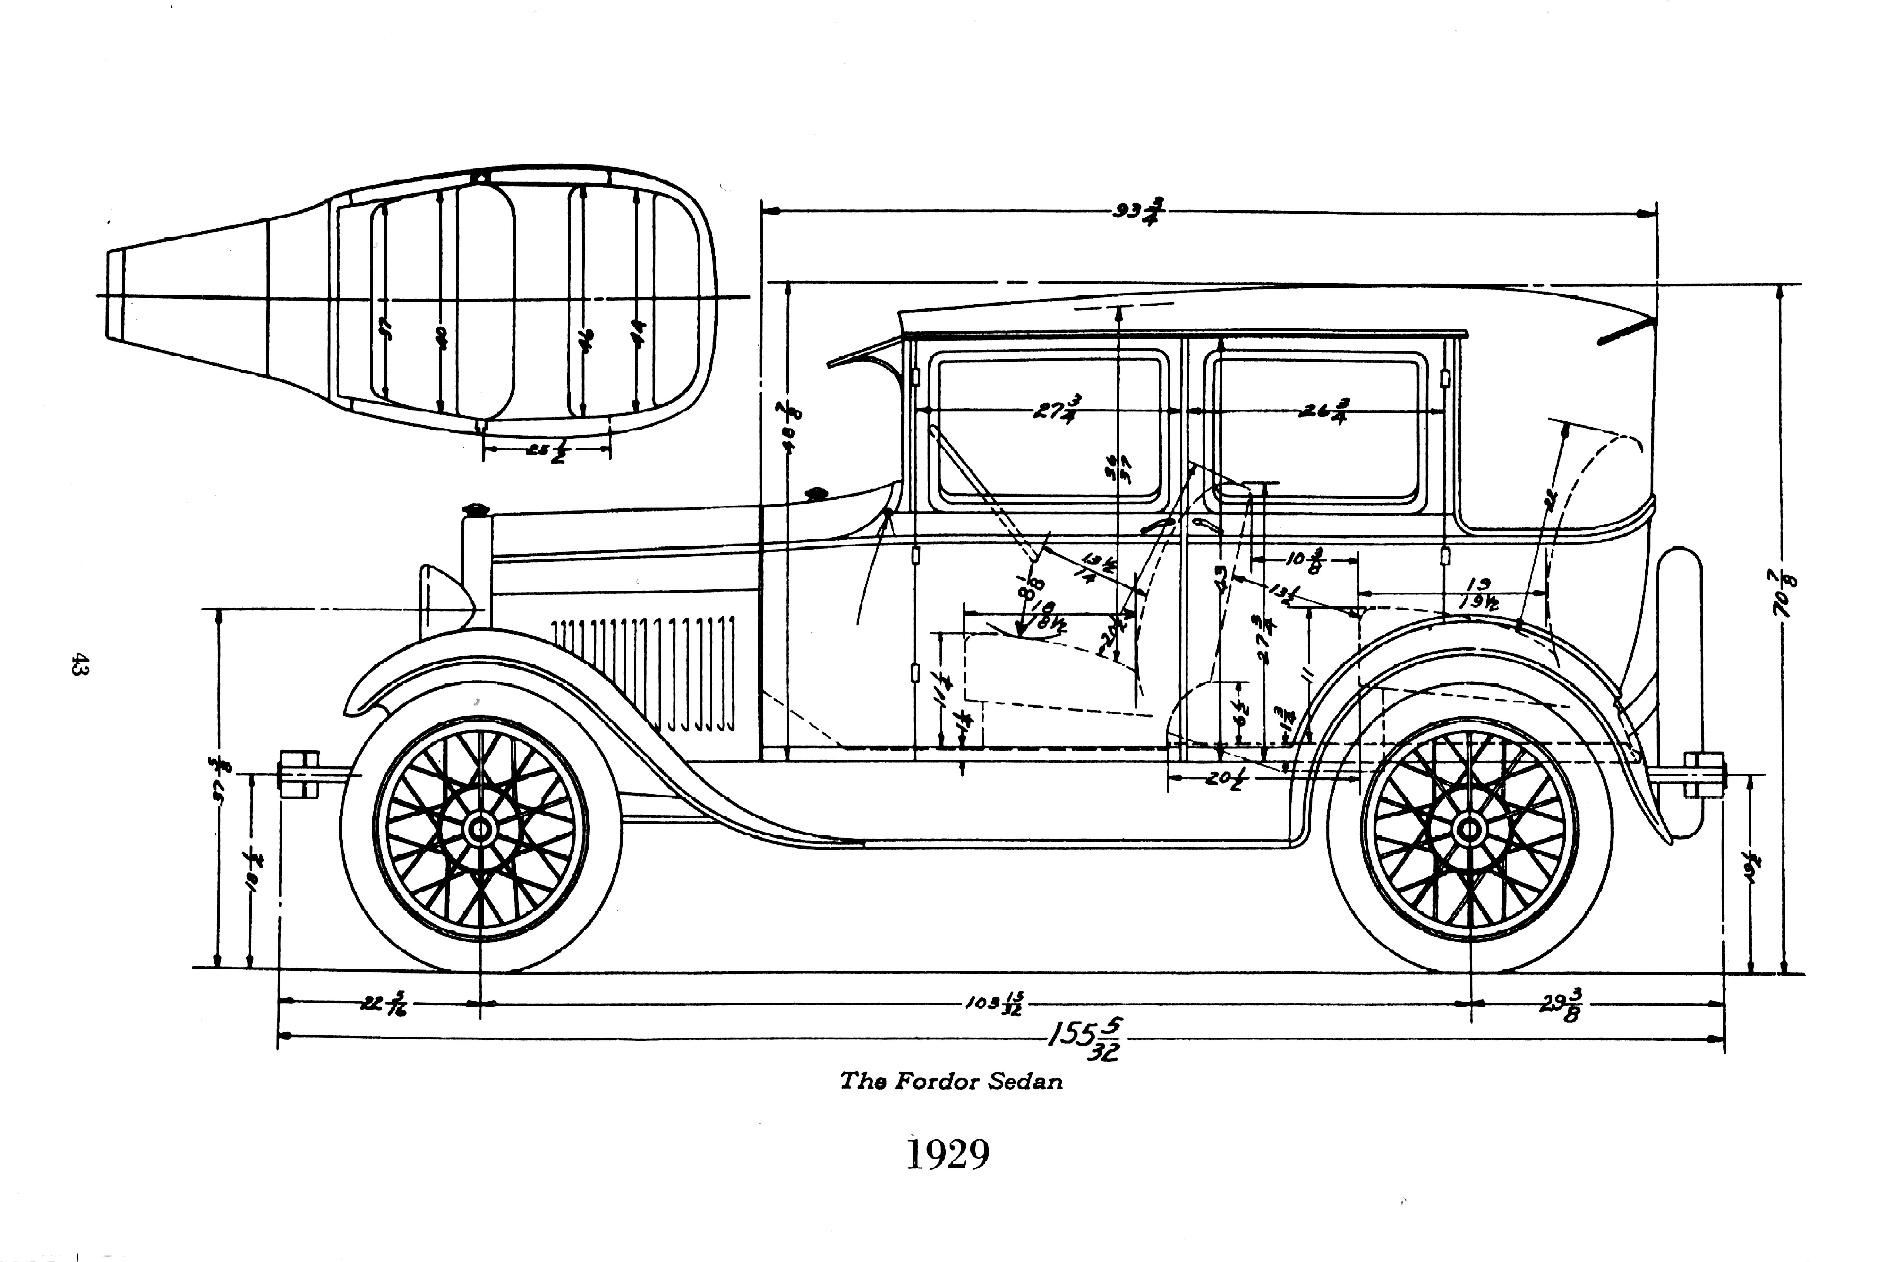 Ford model a chassis dimensions #7